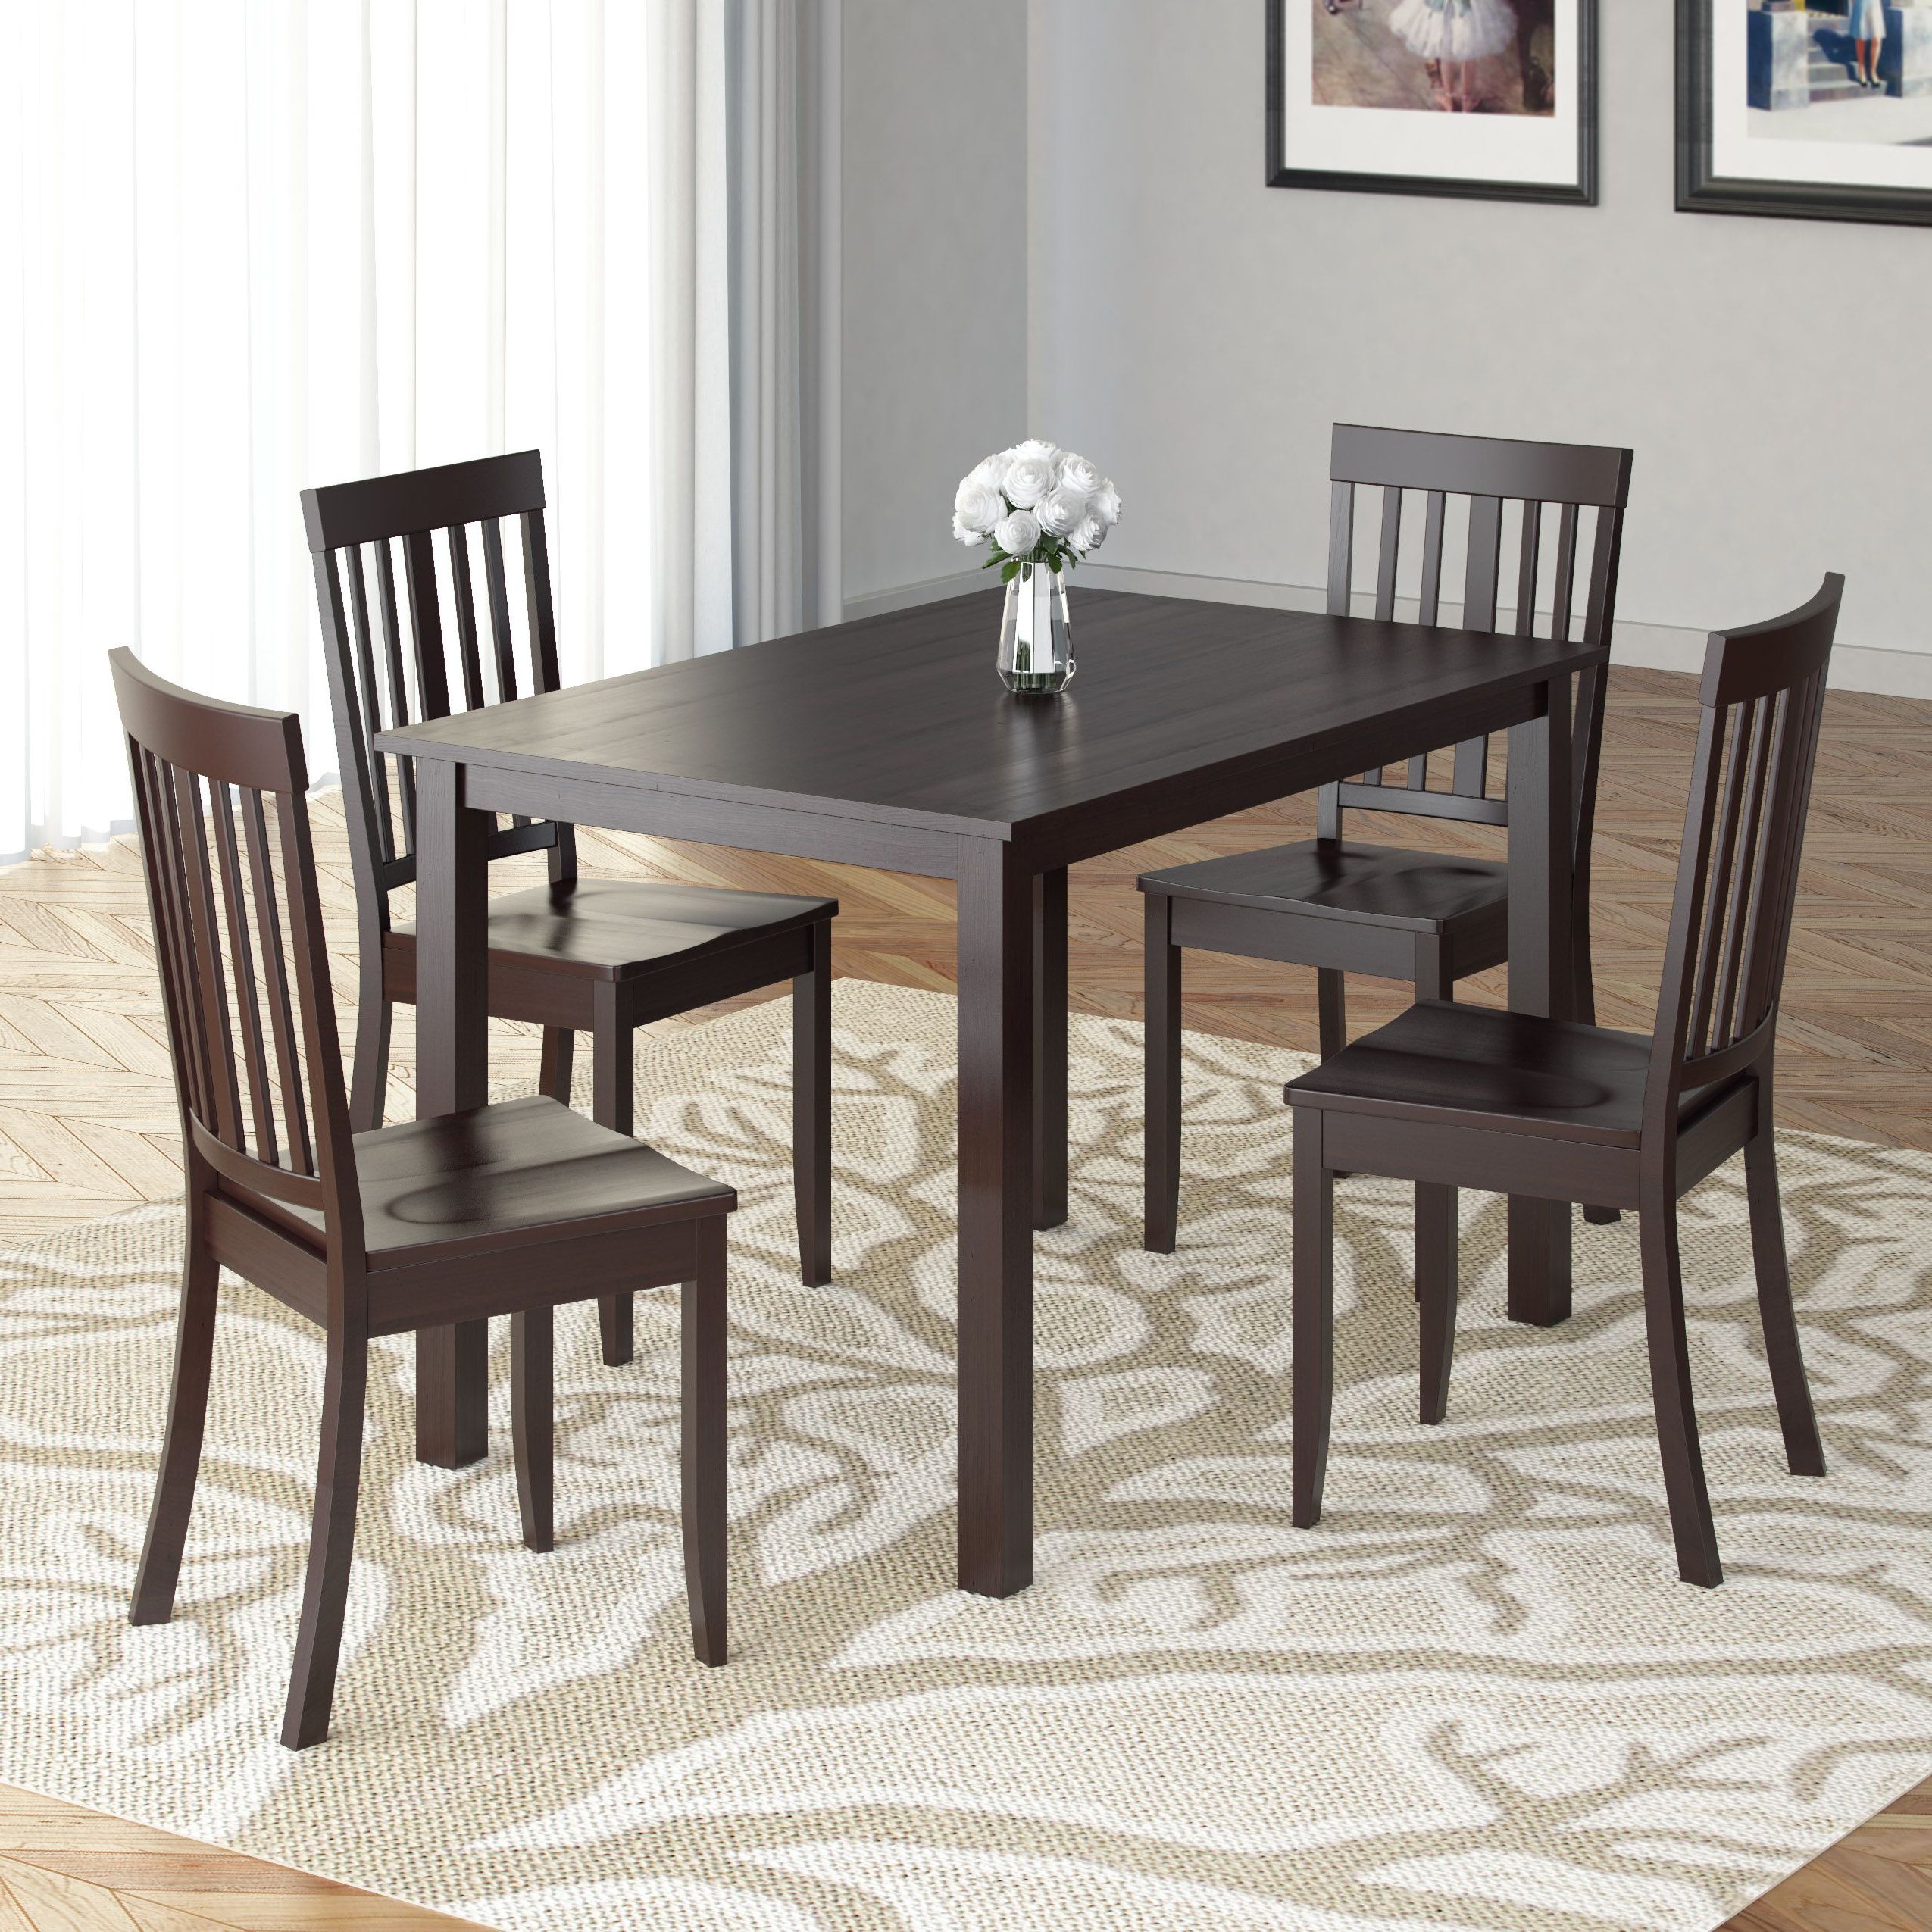 Most Recent Corliving Atwood 5 Pc. Dining Set – Cappuccino, Brown In Atwood Transitional Rectangular Dining Tables (Photo 4 of 25)